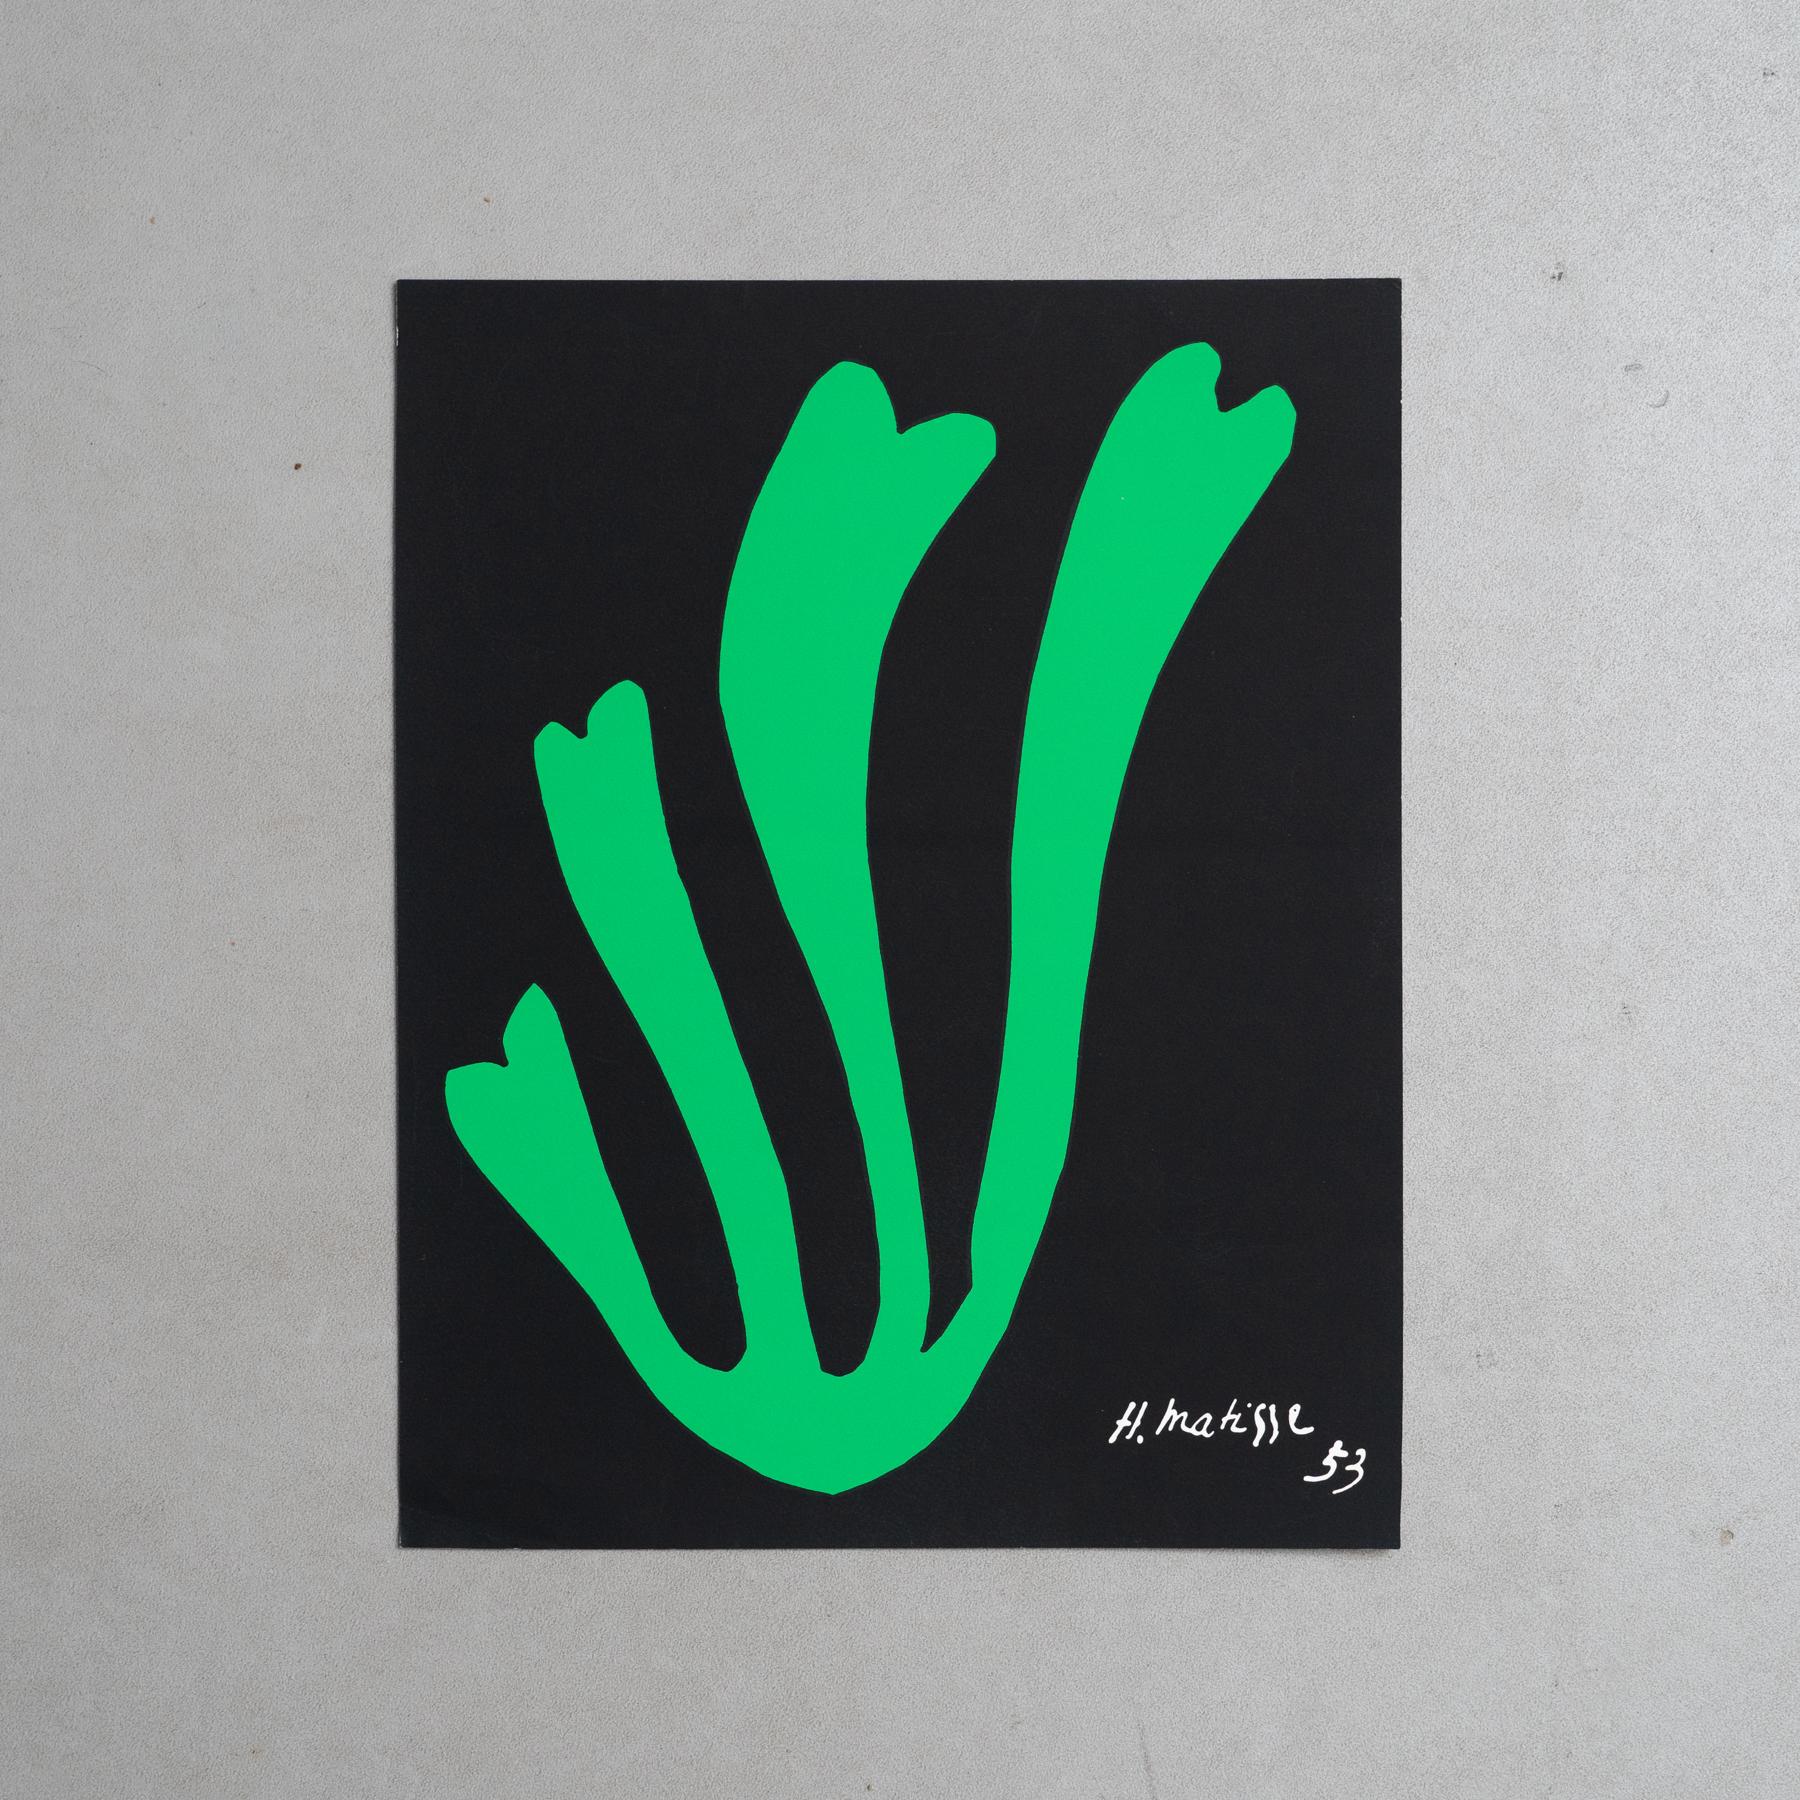 Immerse yourself in the timeless brilliance of Henri Matisse's artistic mastery with this captivating color lithograph from his revered Cut Out Series. Created in 1953 and meticulously edited by Nouvelle Images in the 1970s, this piece exudes